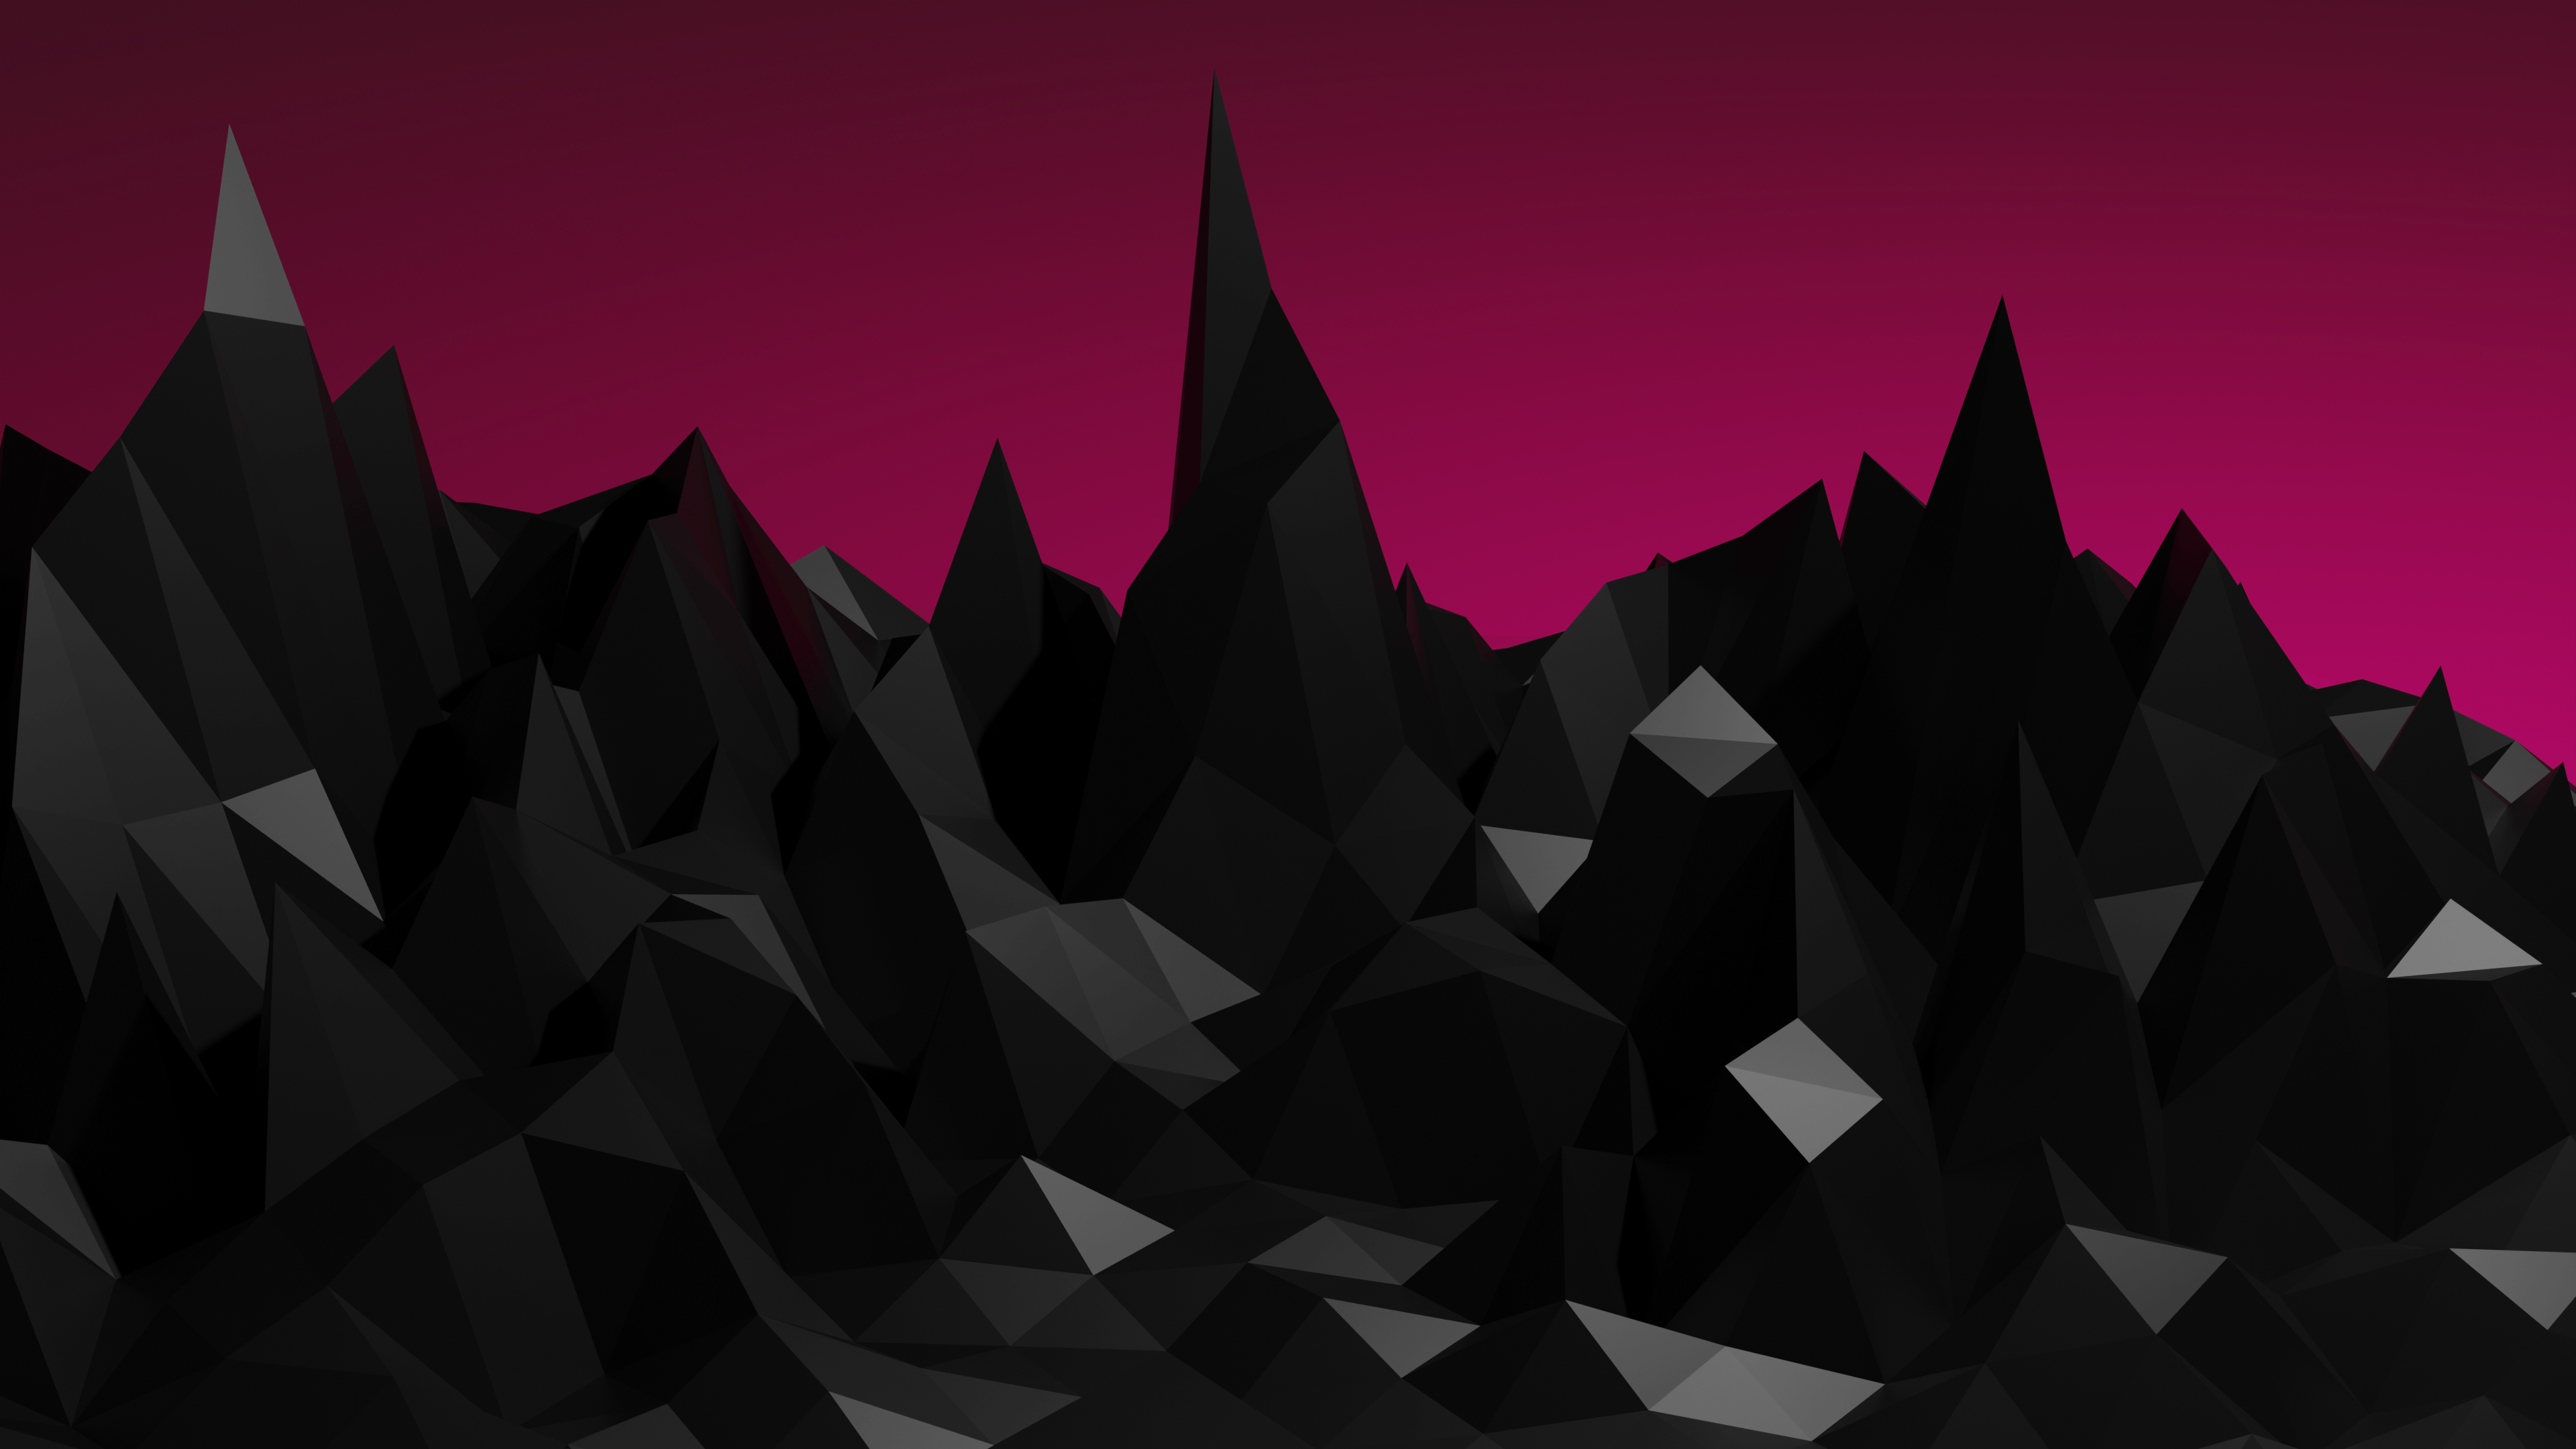 A dark mountain range with a pink sky - Low poly